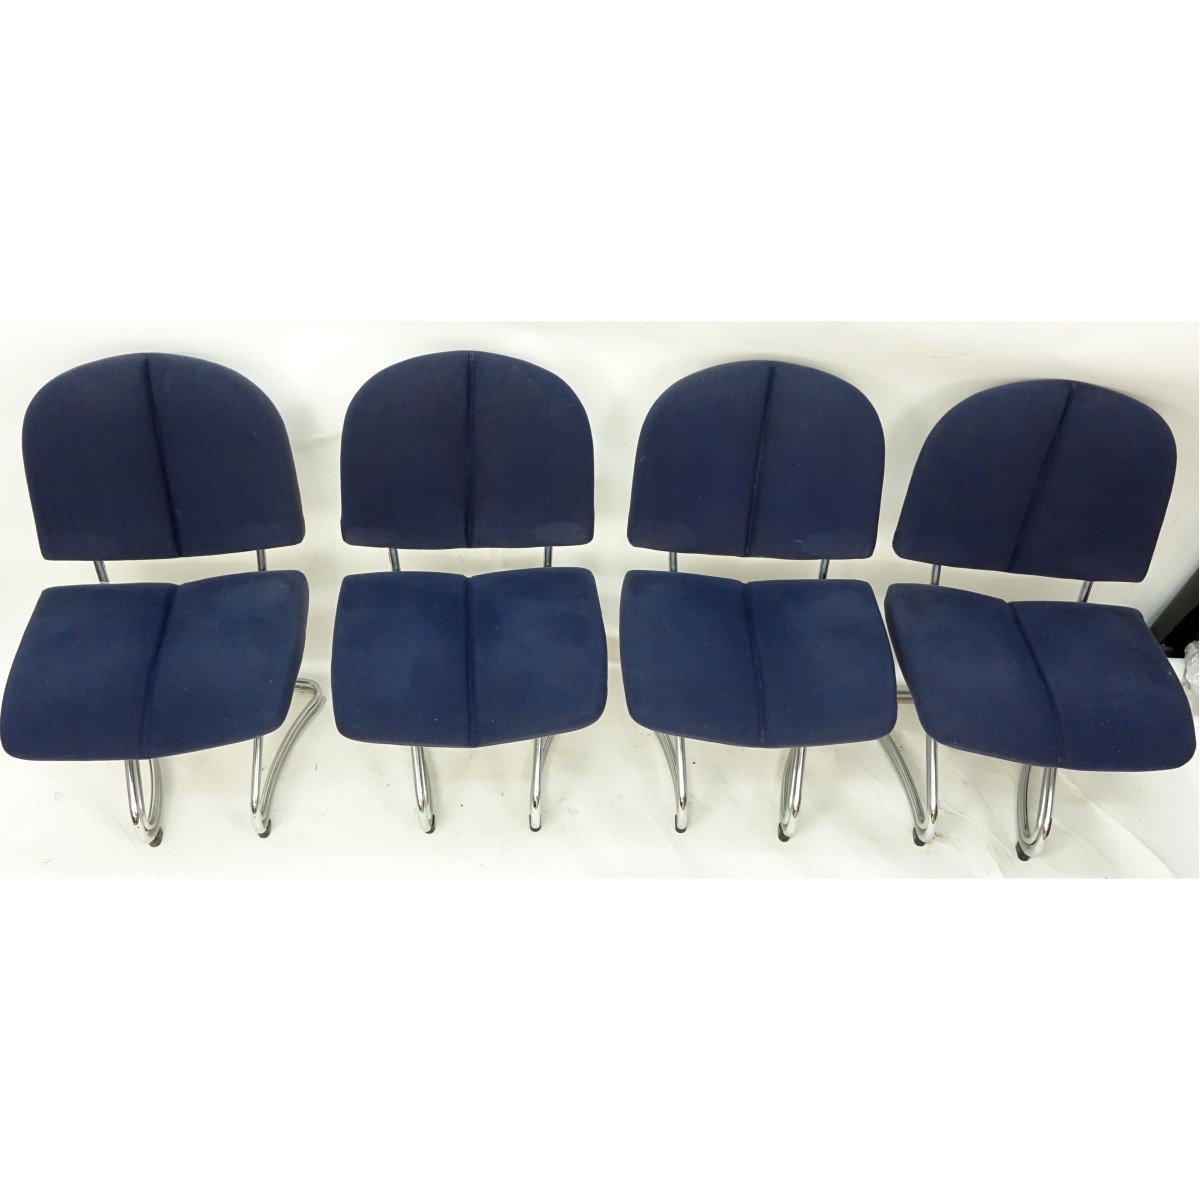 Four (4) Modern Chrome and Upholstered Chairs